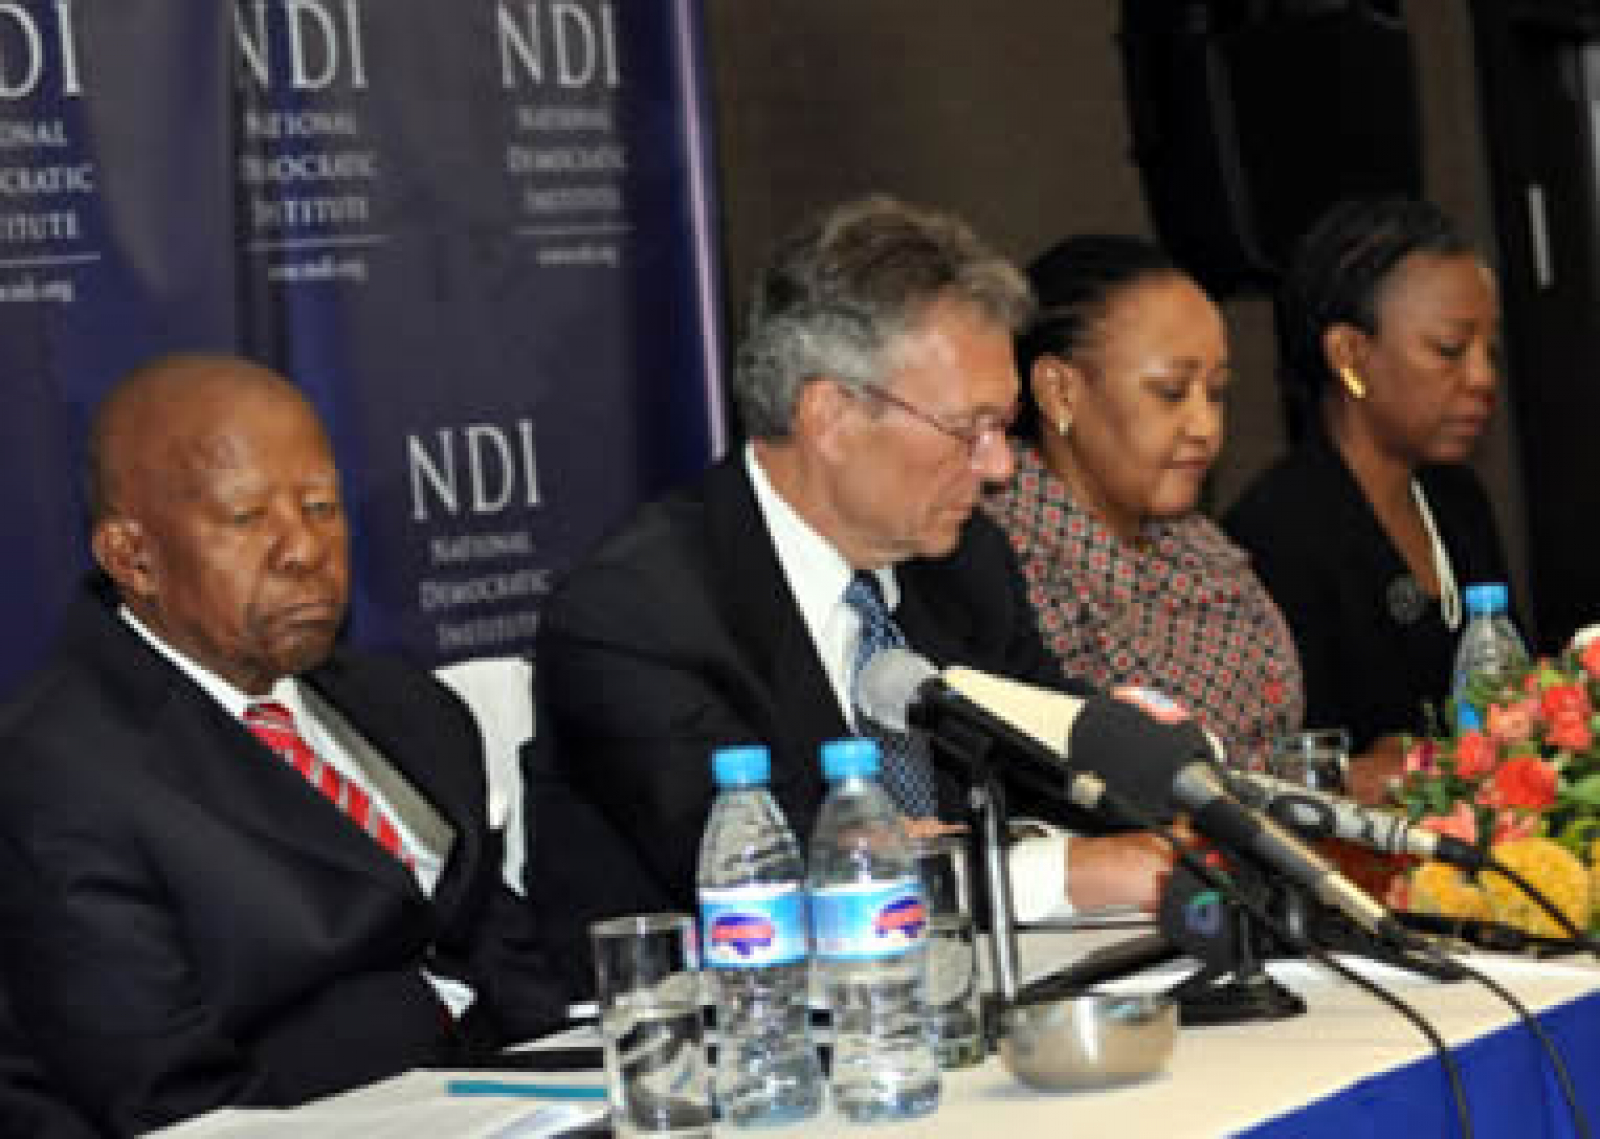 Concerted Efforts Needed in Zambia for Credible, Peaceful Elections, NDI Delegation Finds